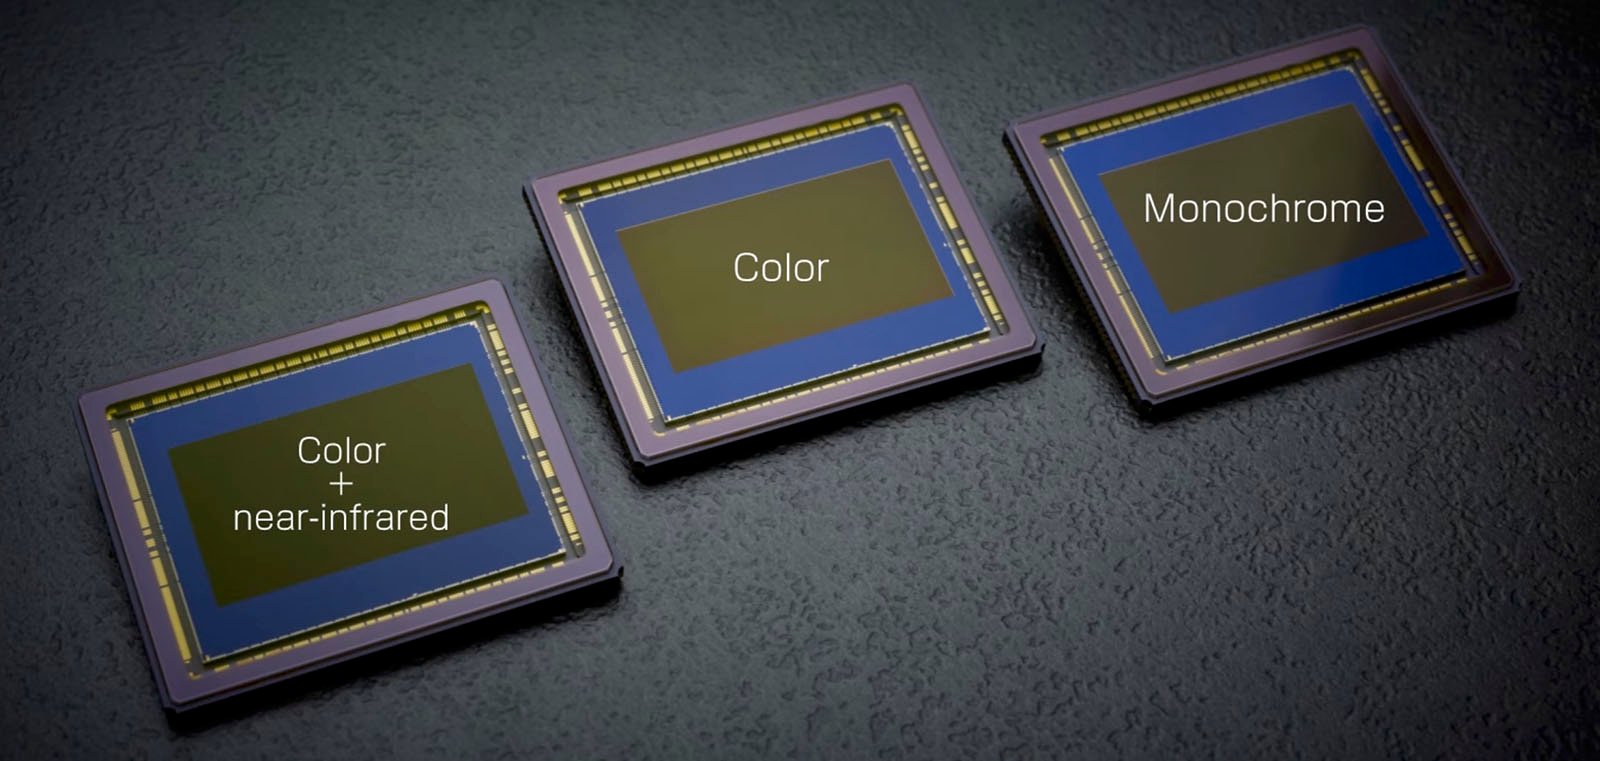 Three types of digital image sensors labeled "color + near-infrared," "color," and "monochrome," displayed on a dark textured surface.